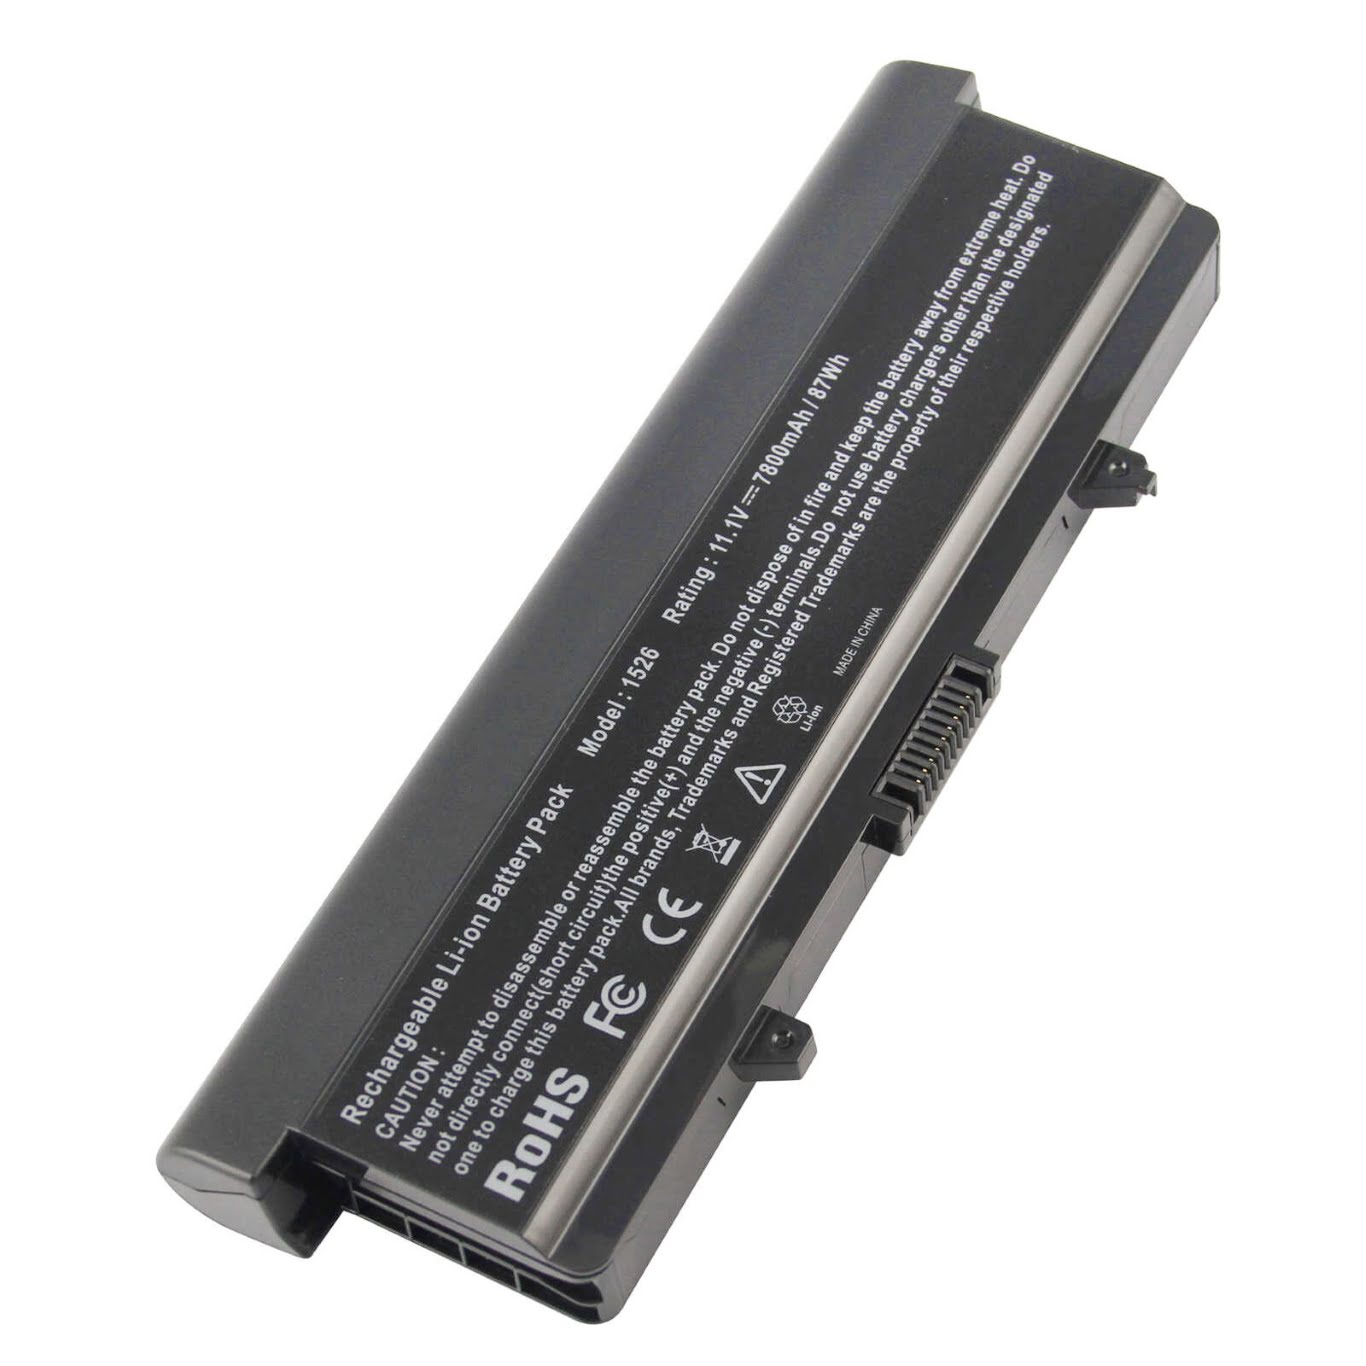 Dell 312-0625, 312-0626 Laptop Batteries For Inspiron 1525, Inspiron 1526 replacement